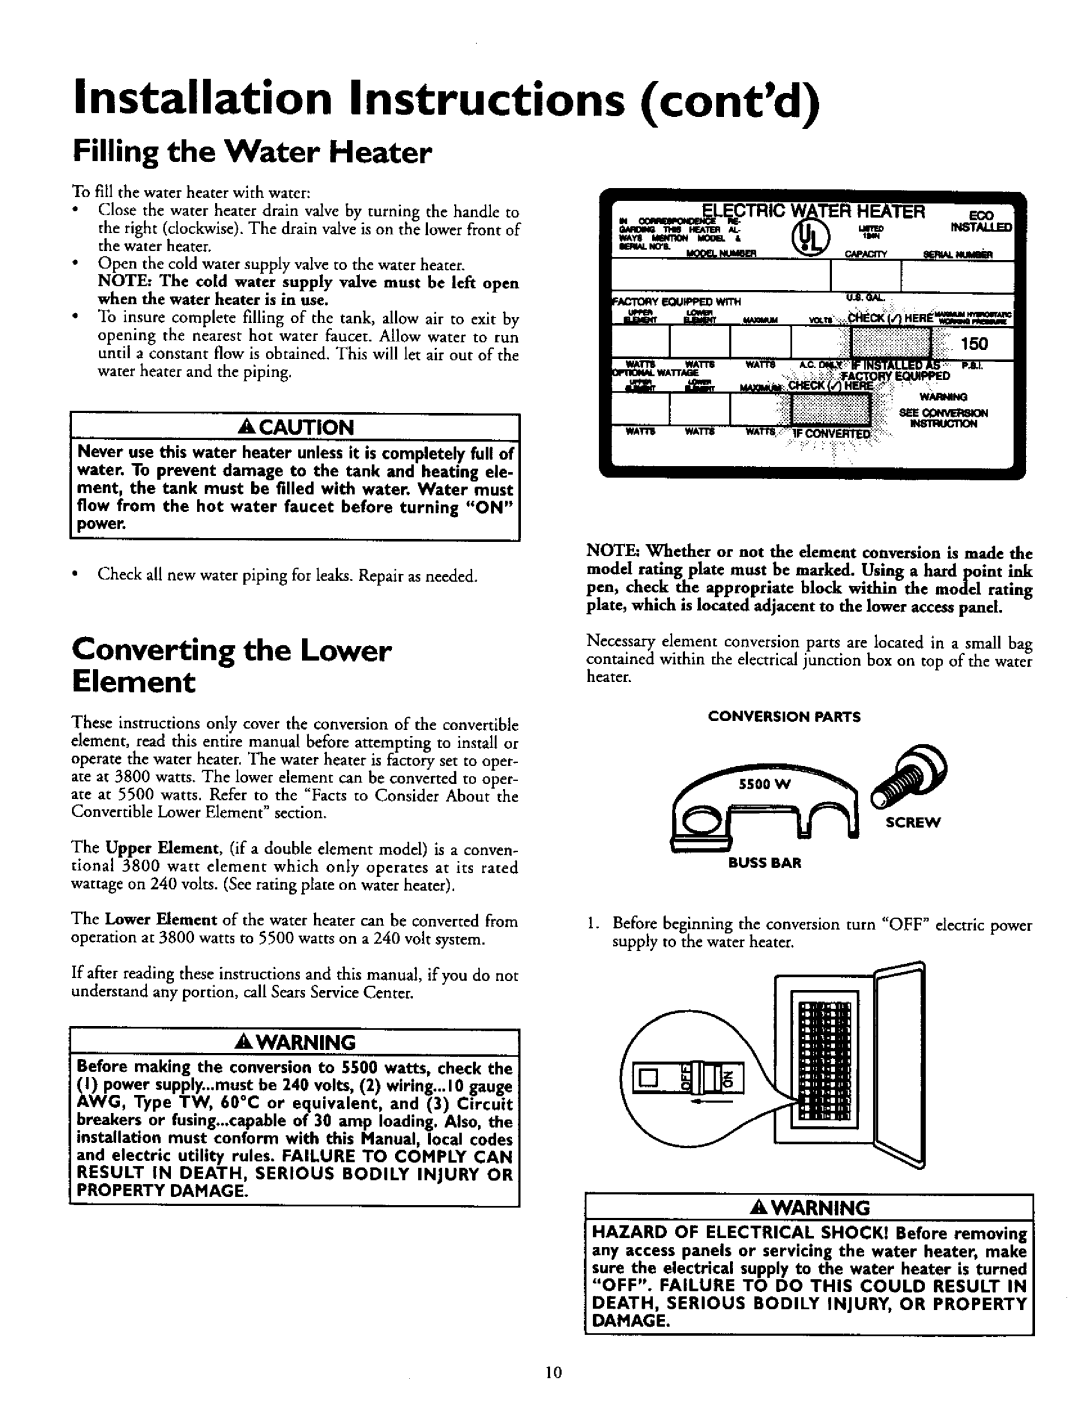 Kenmore 153.327364, 153.327864 Installation Instructions contd, Filling the Water Heater, Converting the Lower Element 